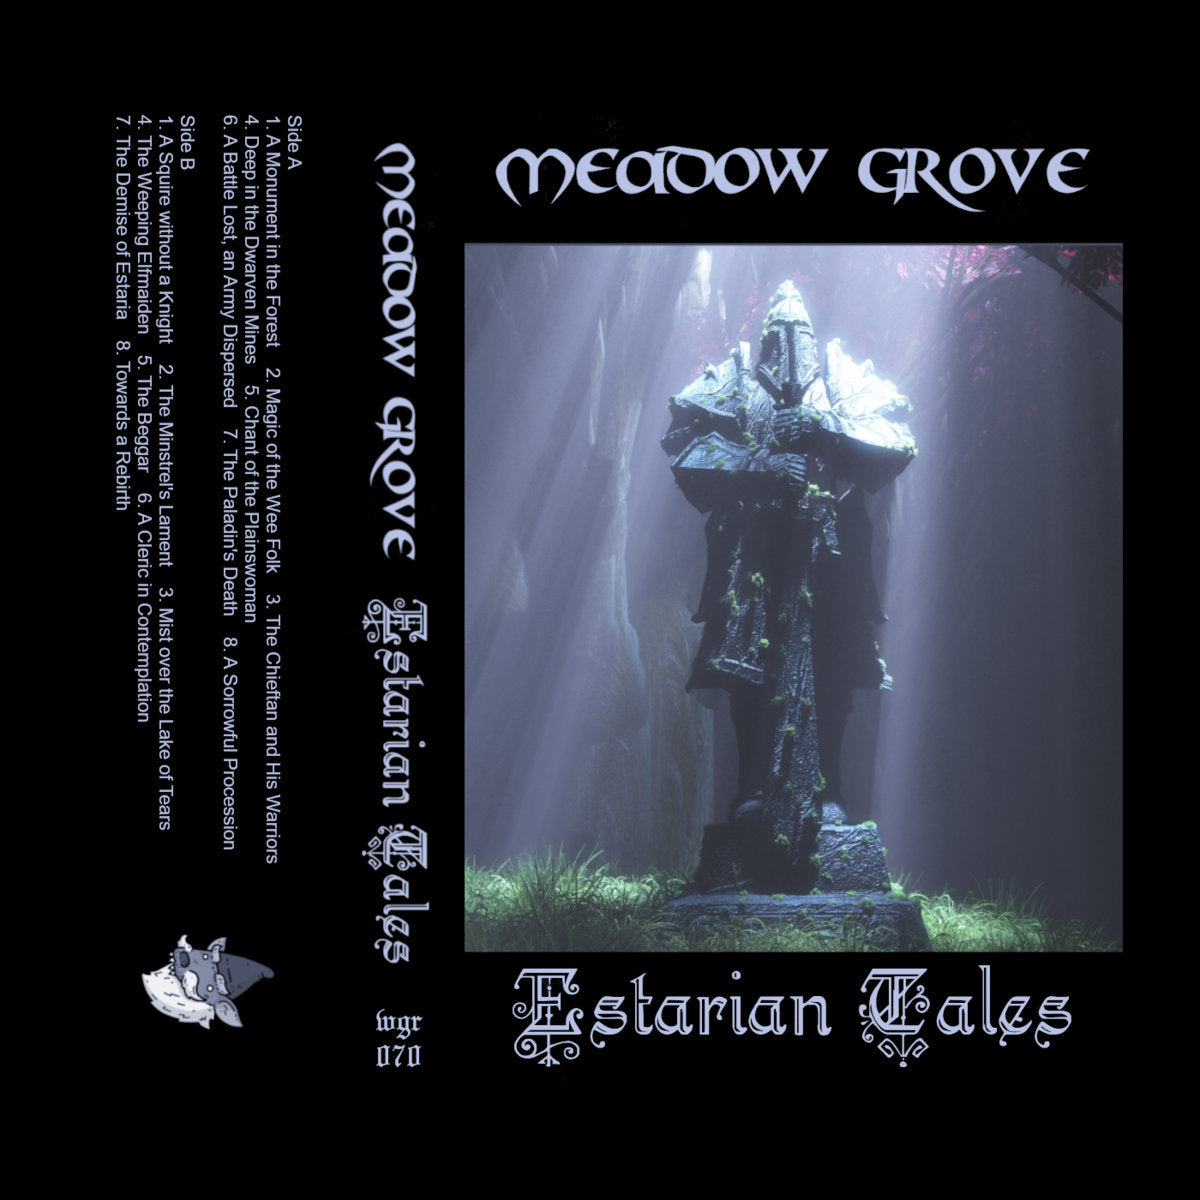 [SOLD OUT] MEADOW GROVE "Estarian Tales" cassette tape (lim.65)